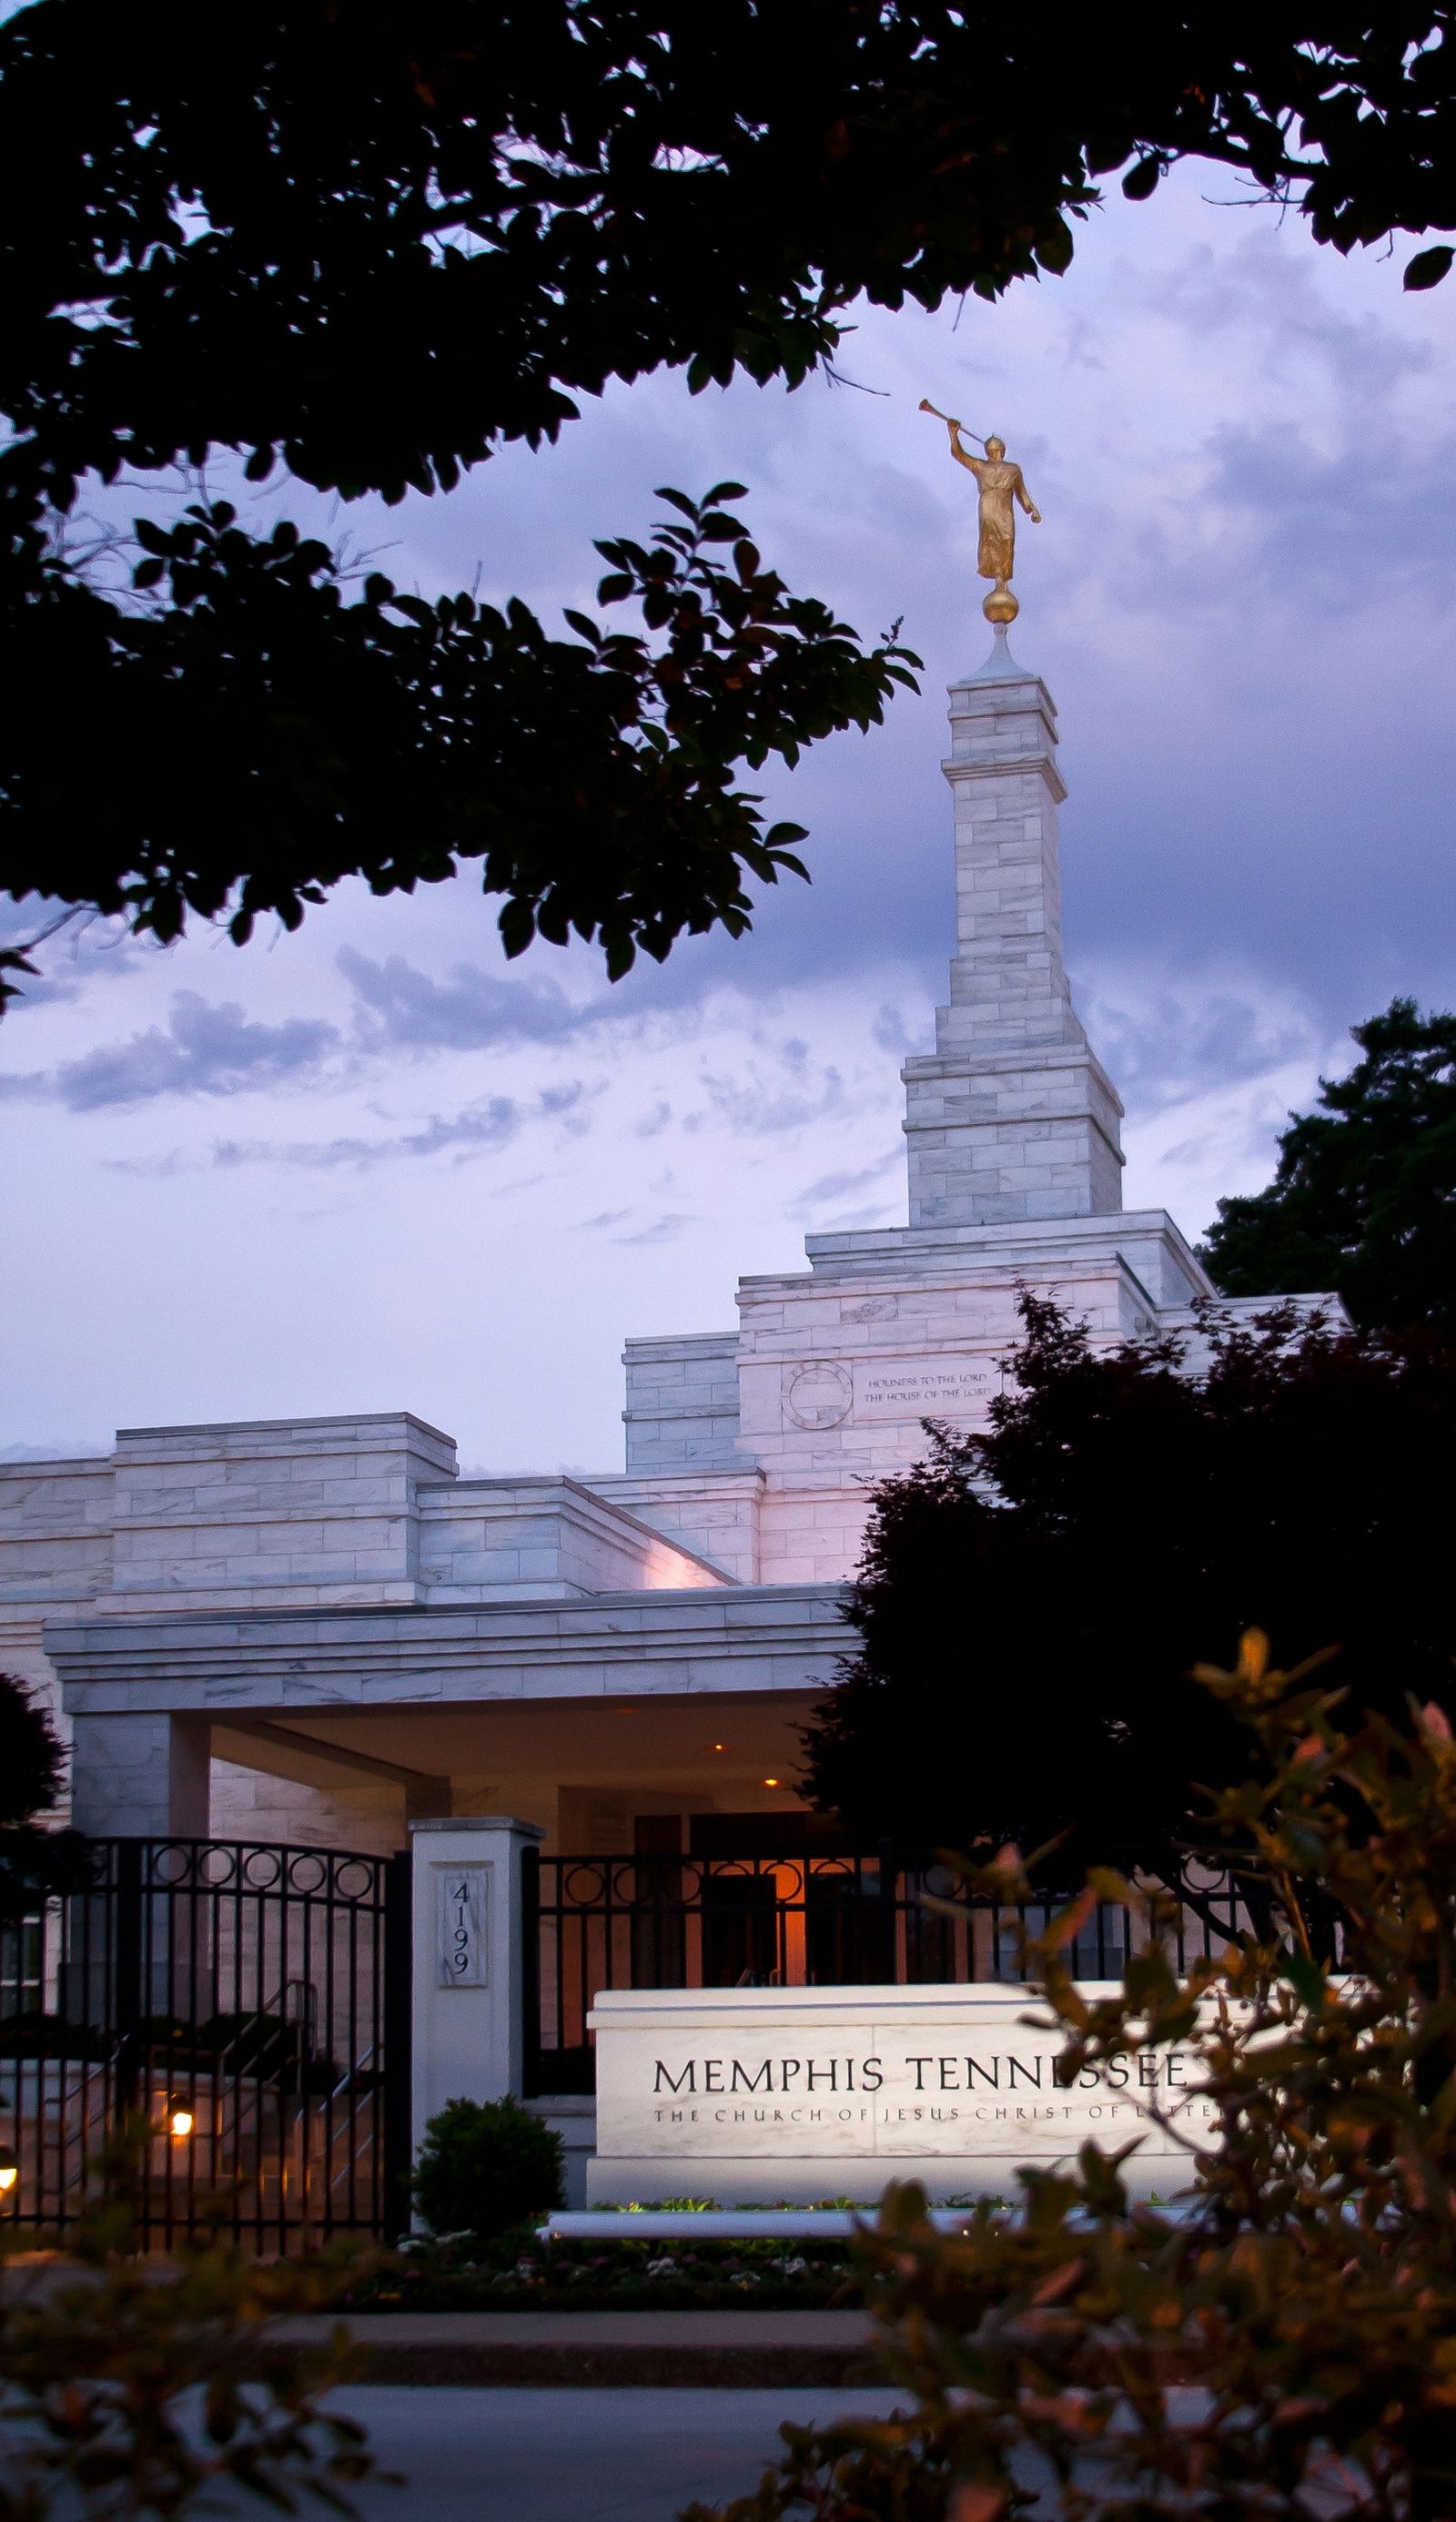 A portrait view of the Memphis Tennessee Temple with its sign in the front.